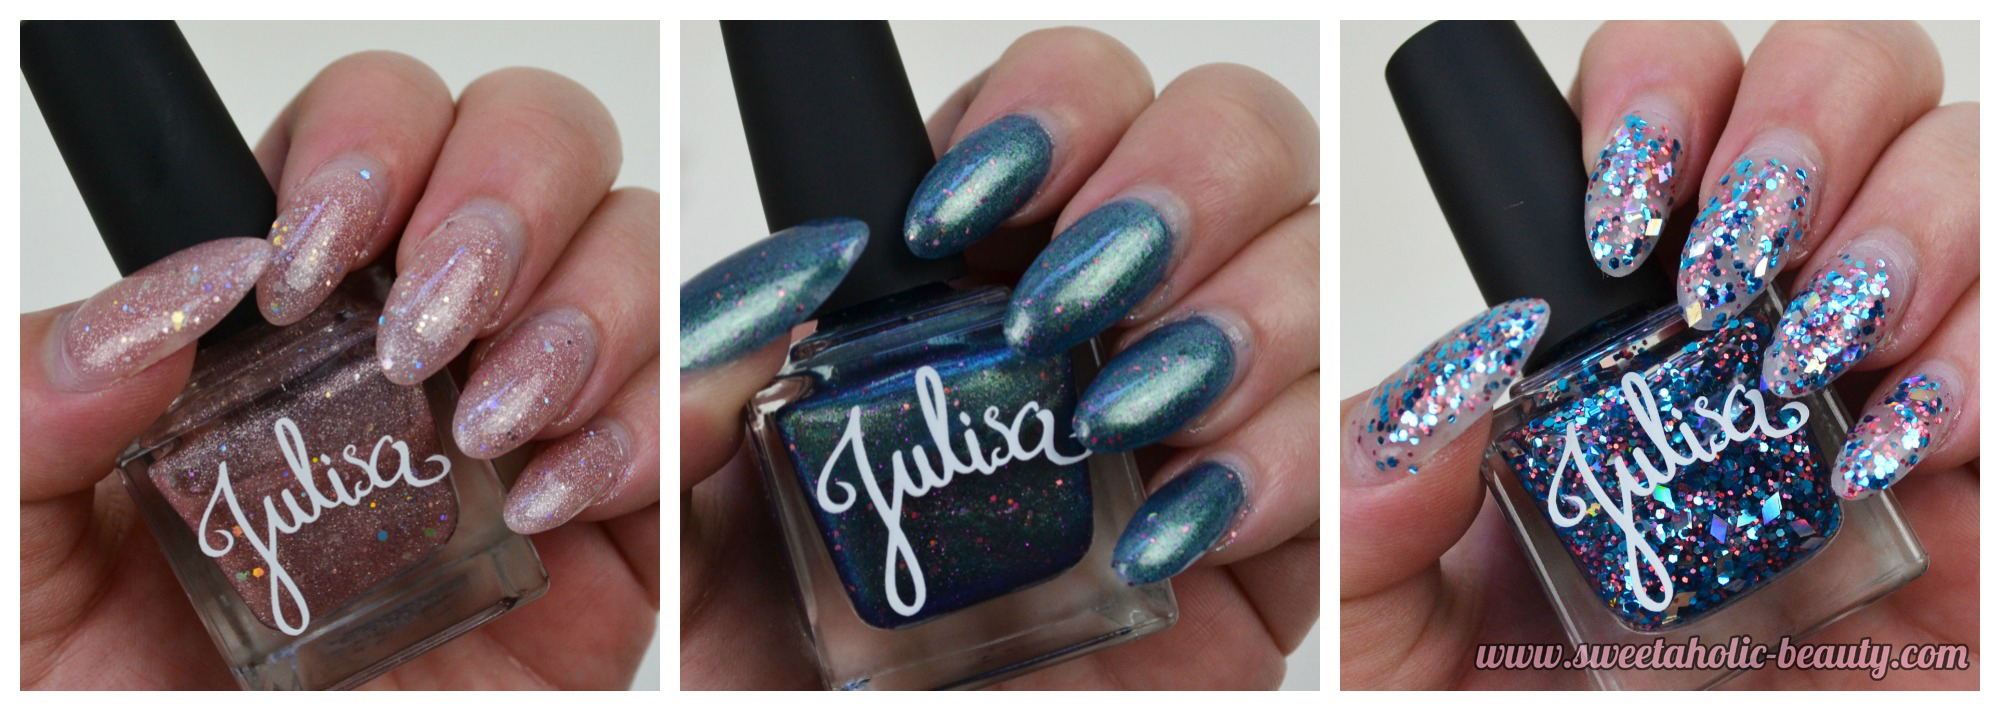 Mermaid Nails with Julisa Nails - Review & Swatches